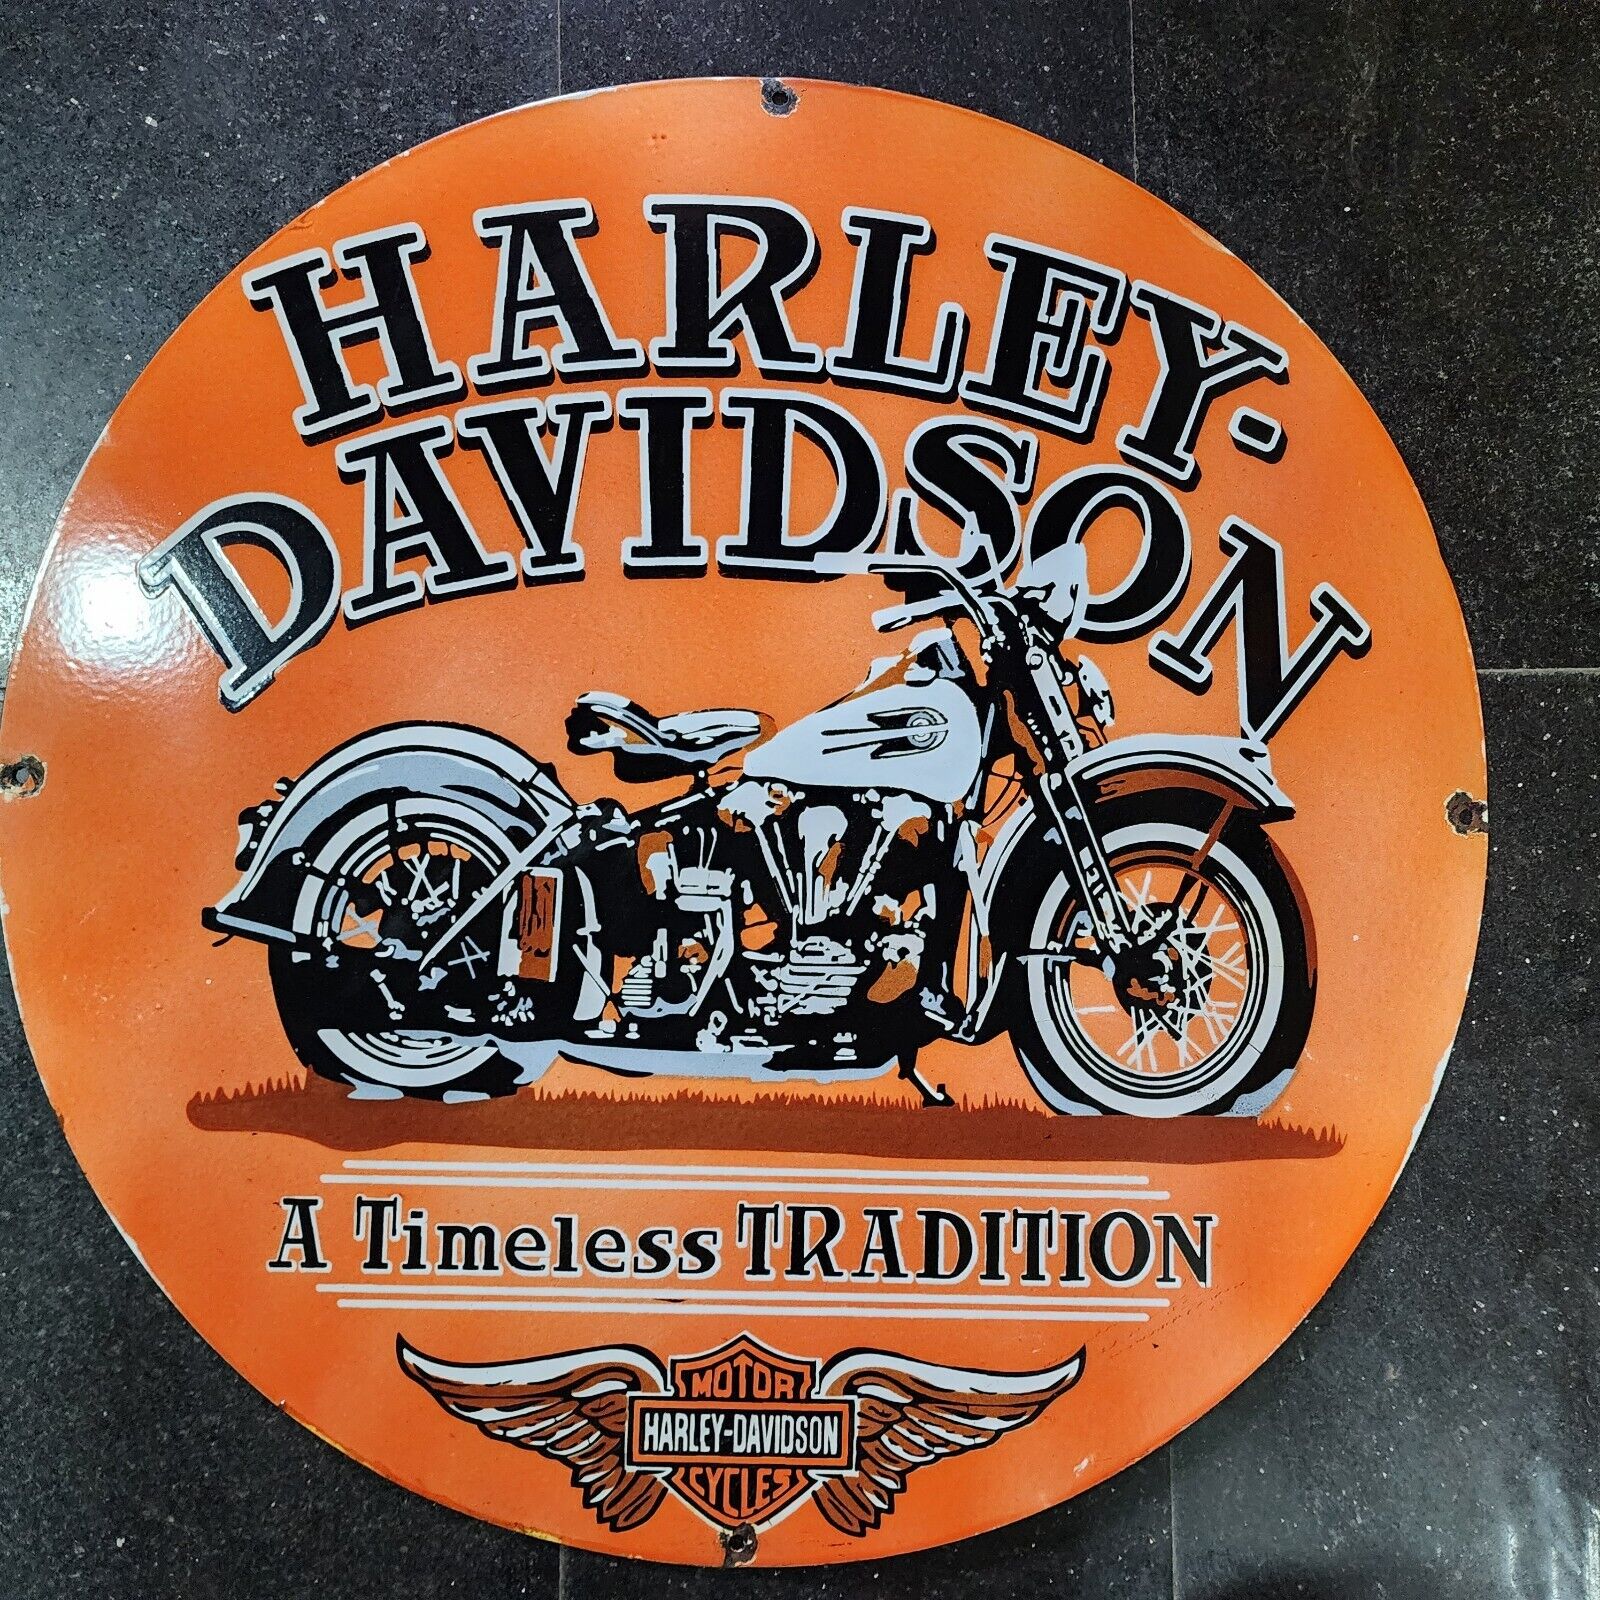 HARLEY TIMELESS PORCELAIN ENAMEL SIGN 30 INCHES ROUND